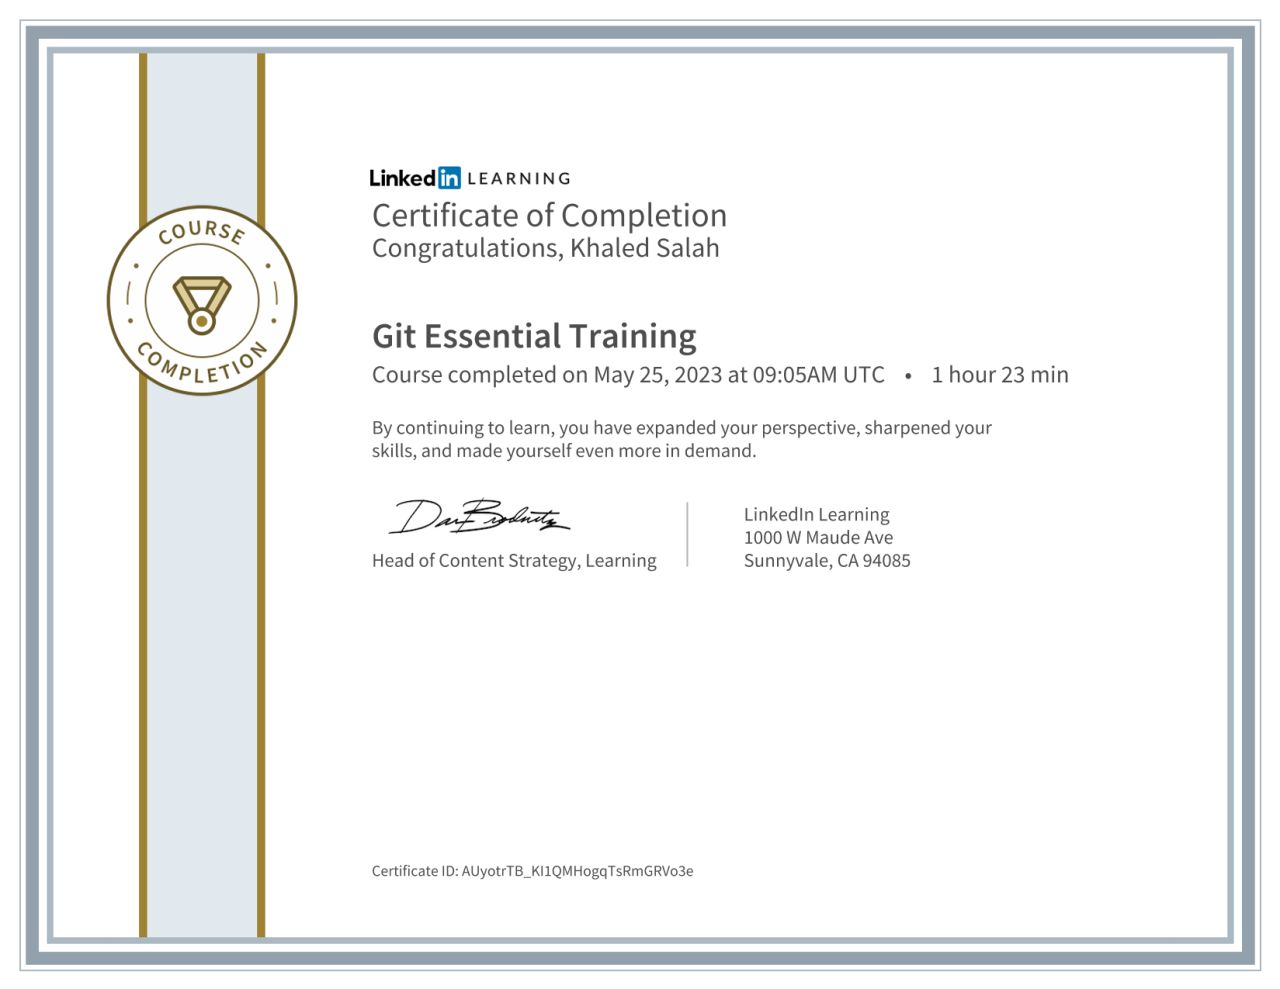 Certificate of completion for Git Essential Training content earned by Khaled Salah